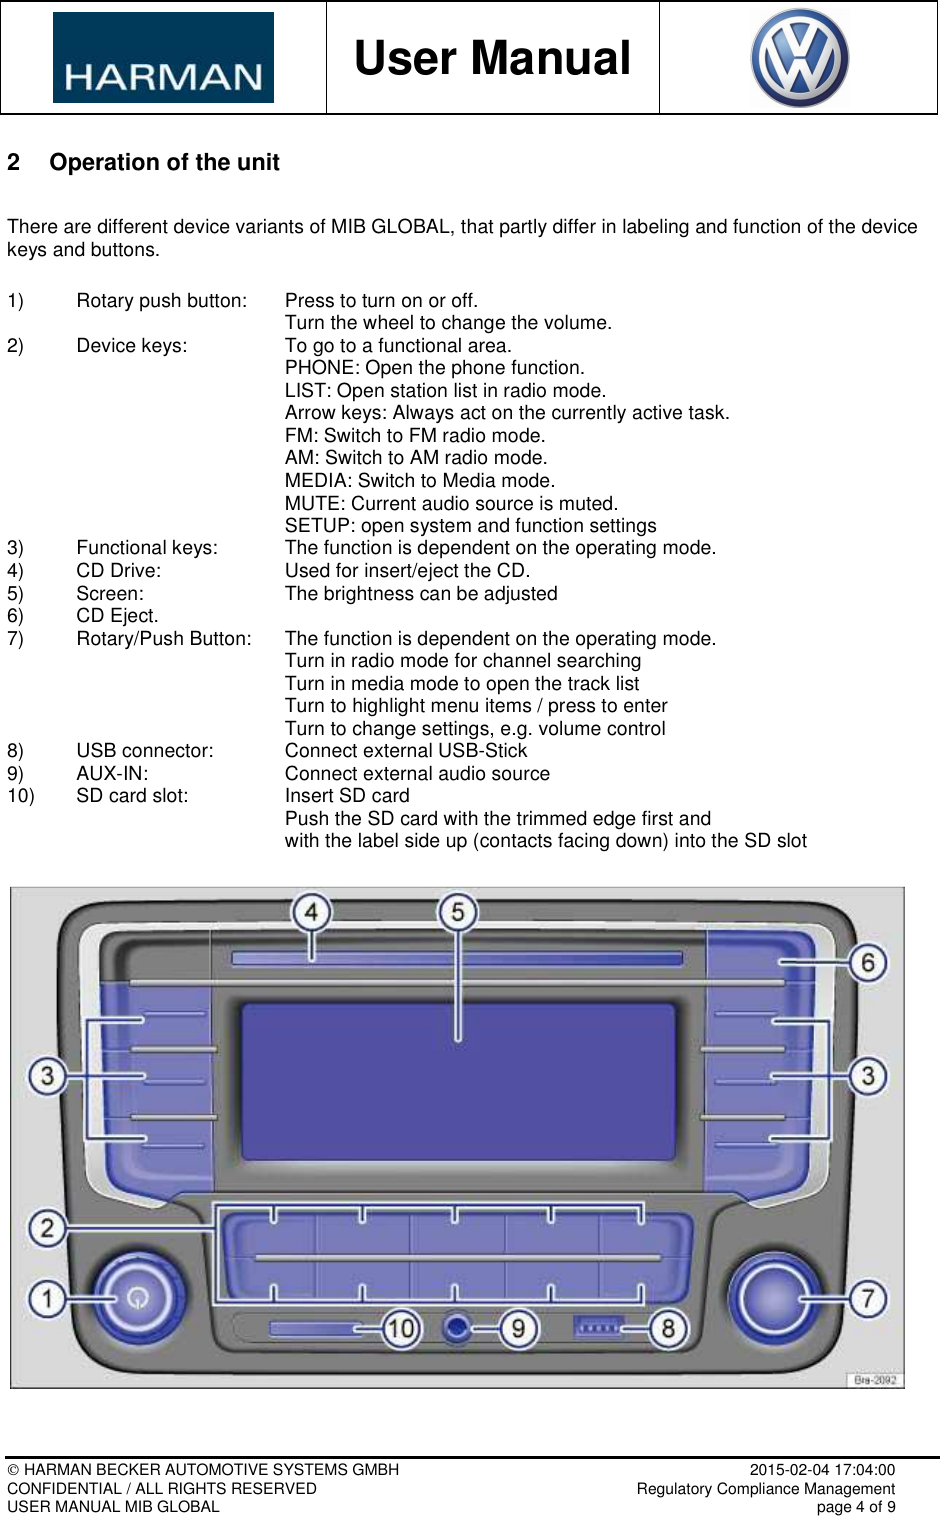           User Manual     HARMAN BECKER AUTOMOTIVE SYSTEMS GMBH    2015-02-04 17:04:00 CONFIDENTIAL / ALL RIGHTS RESERVED     Regulatory Compliance Management USER MANUAL MIB GLOBAL    page 4 of 9  2  Operation of the unit  There are different device variants of MIB GLOBAL, that partly differ in labeling and function of the device keys and buttons.  1)  Rotary push button:   Press to turn on or off.         Turn the wheel to change the volume. 2)   Device keys:     To go to a functional area.         PHONE: Open the phone function.         LIST: Open station list in radio mode.         Arrow keys: Always act on the currently active task.         FM: Switch to FM radio mode.         AM: Switch to AM radio mode.         MEDIA: Switch to Media mode.         MUTE: Current audio source is muted.         SETUP: open system and function settings 3)   Functional keys:   The function is dependent on the operating mode. 4)   CD Drive:     Used for insert/eject the CD. 5)   Screen:     The brightness can be adjusted 6)   CD Eject. 7)   Rotary/Push Button:   The function is dependent on the operating mode.         Turn in radio mode for channel searching         Turn in media mode to open the track list         Turn to highlight menu items / press to enter         Turn to change settings, e.g. volume control 8)   USB connector:   Connect external USB-Stick 9)   AUX-IN:    Connect external audio source 10)   SD card slot:     Insert SD card         Push the SD card with the trimmed edge first and          with the label side up (contacts facing down) into the SD slot    